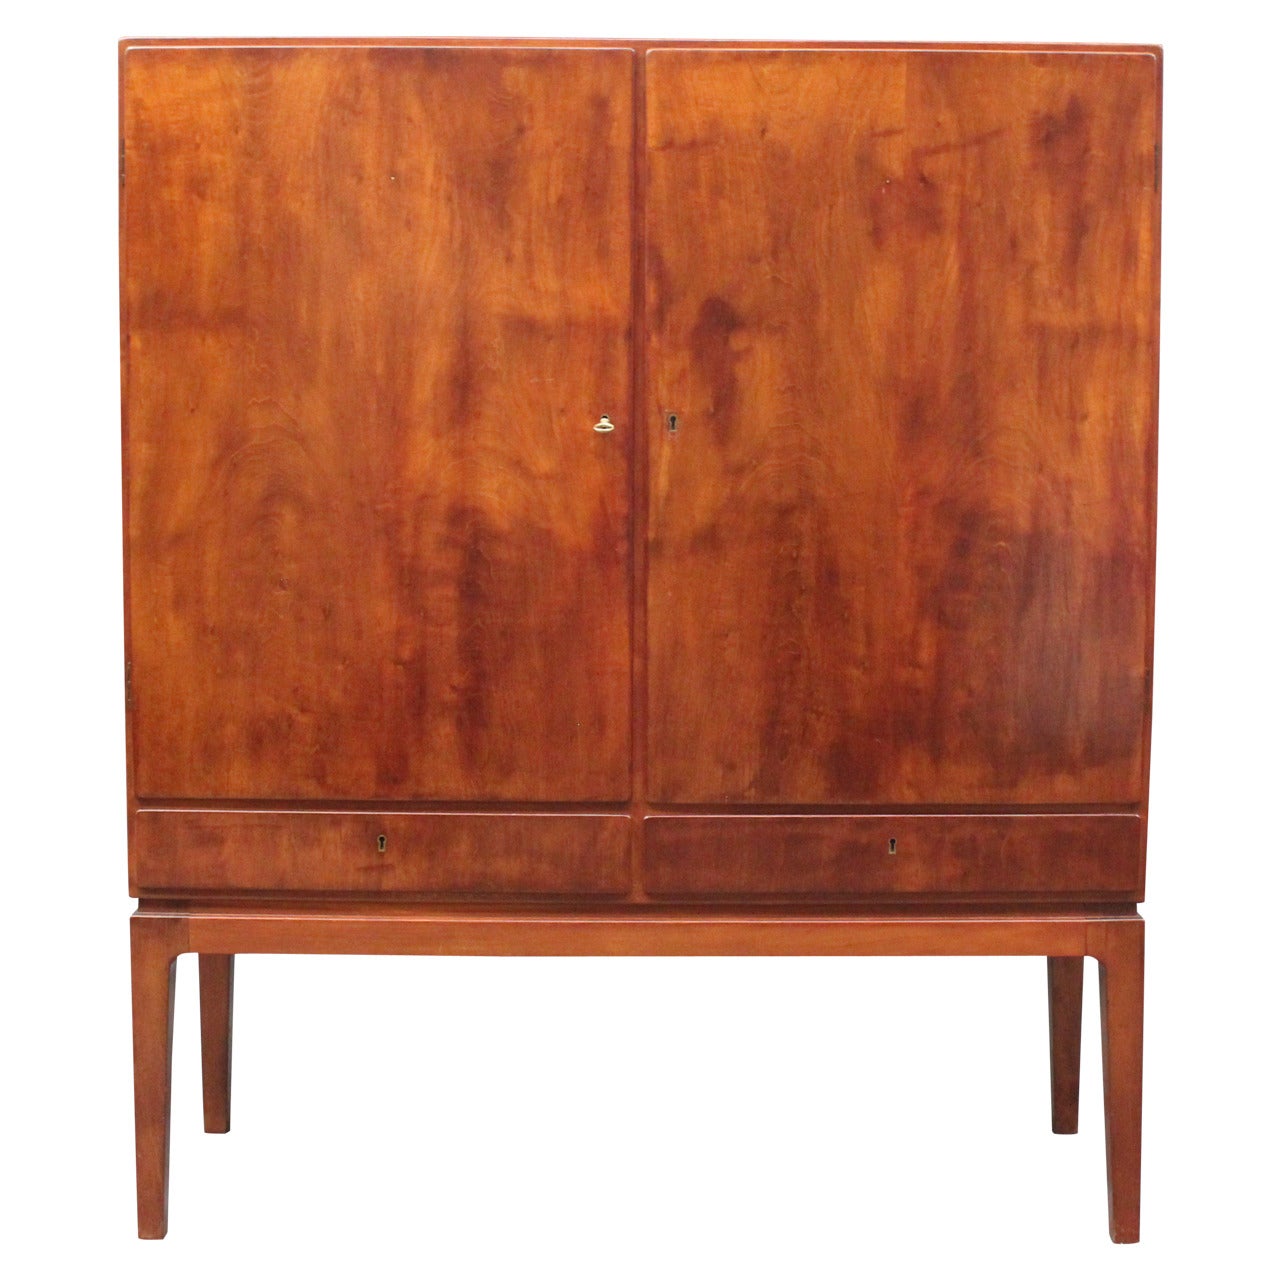 Sideboard, Model 1761, in Mahogany by Ole Wanscher and by Fritz Hansen, 1943